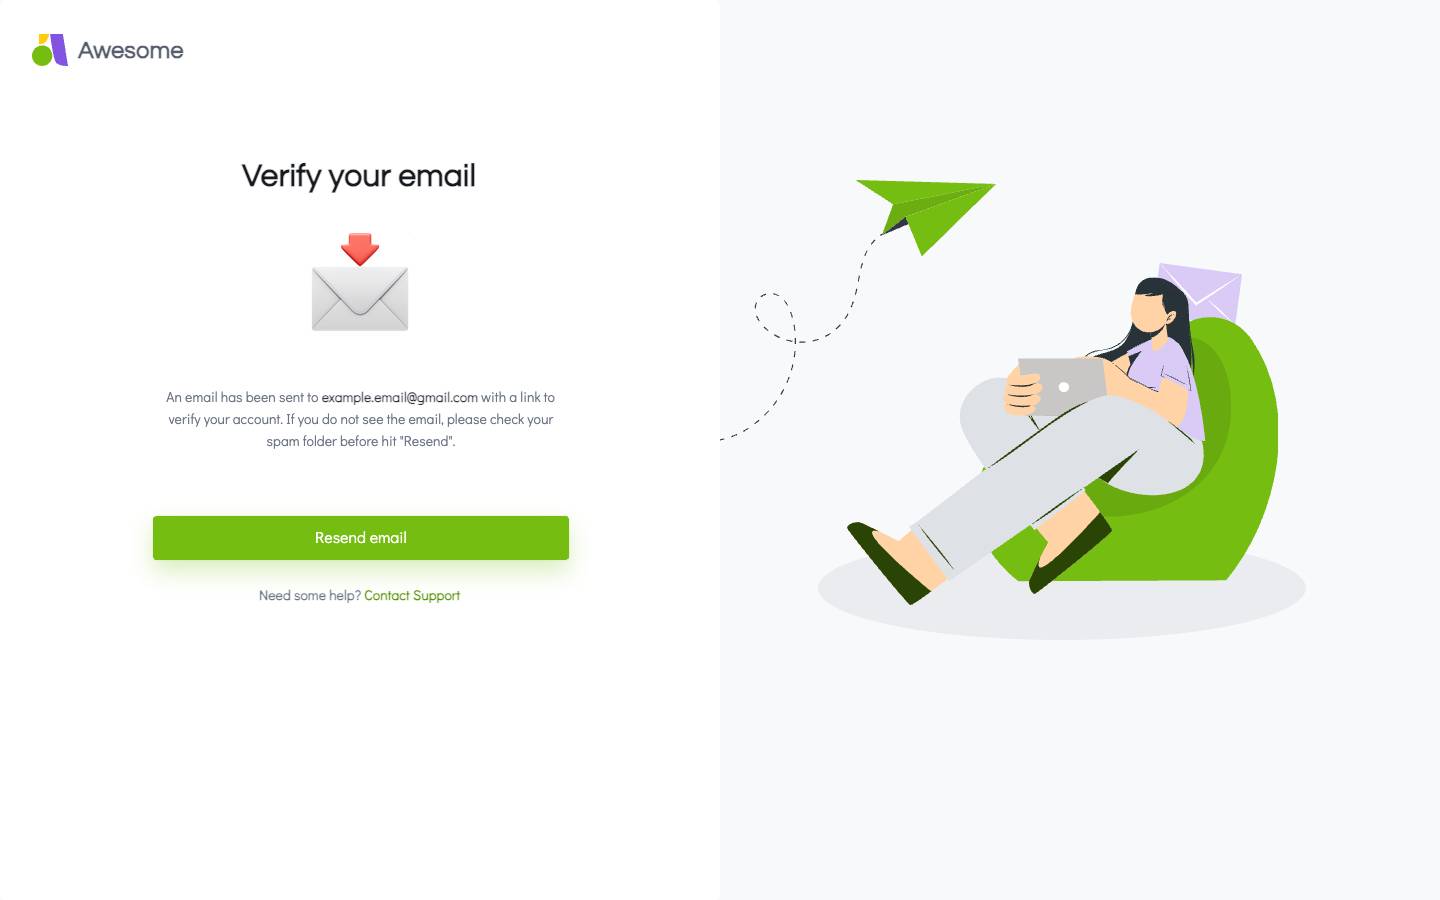 Sign up - Verify email